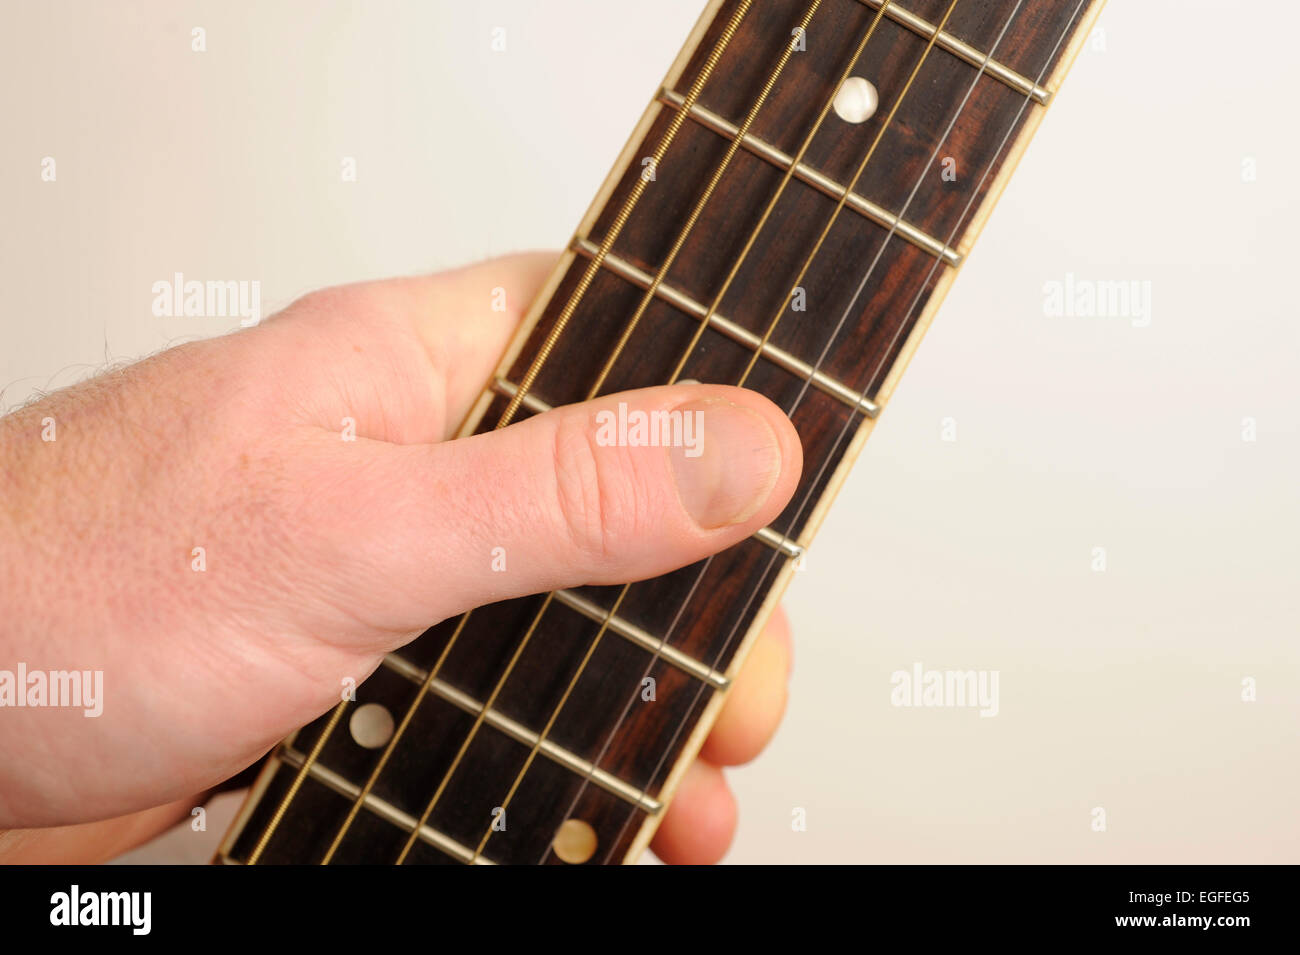 Male Holding a Fret board Stock Photo